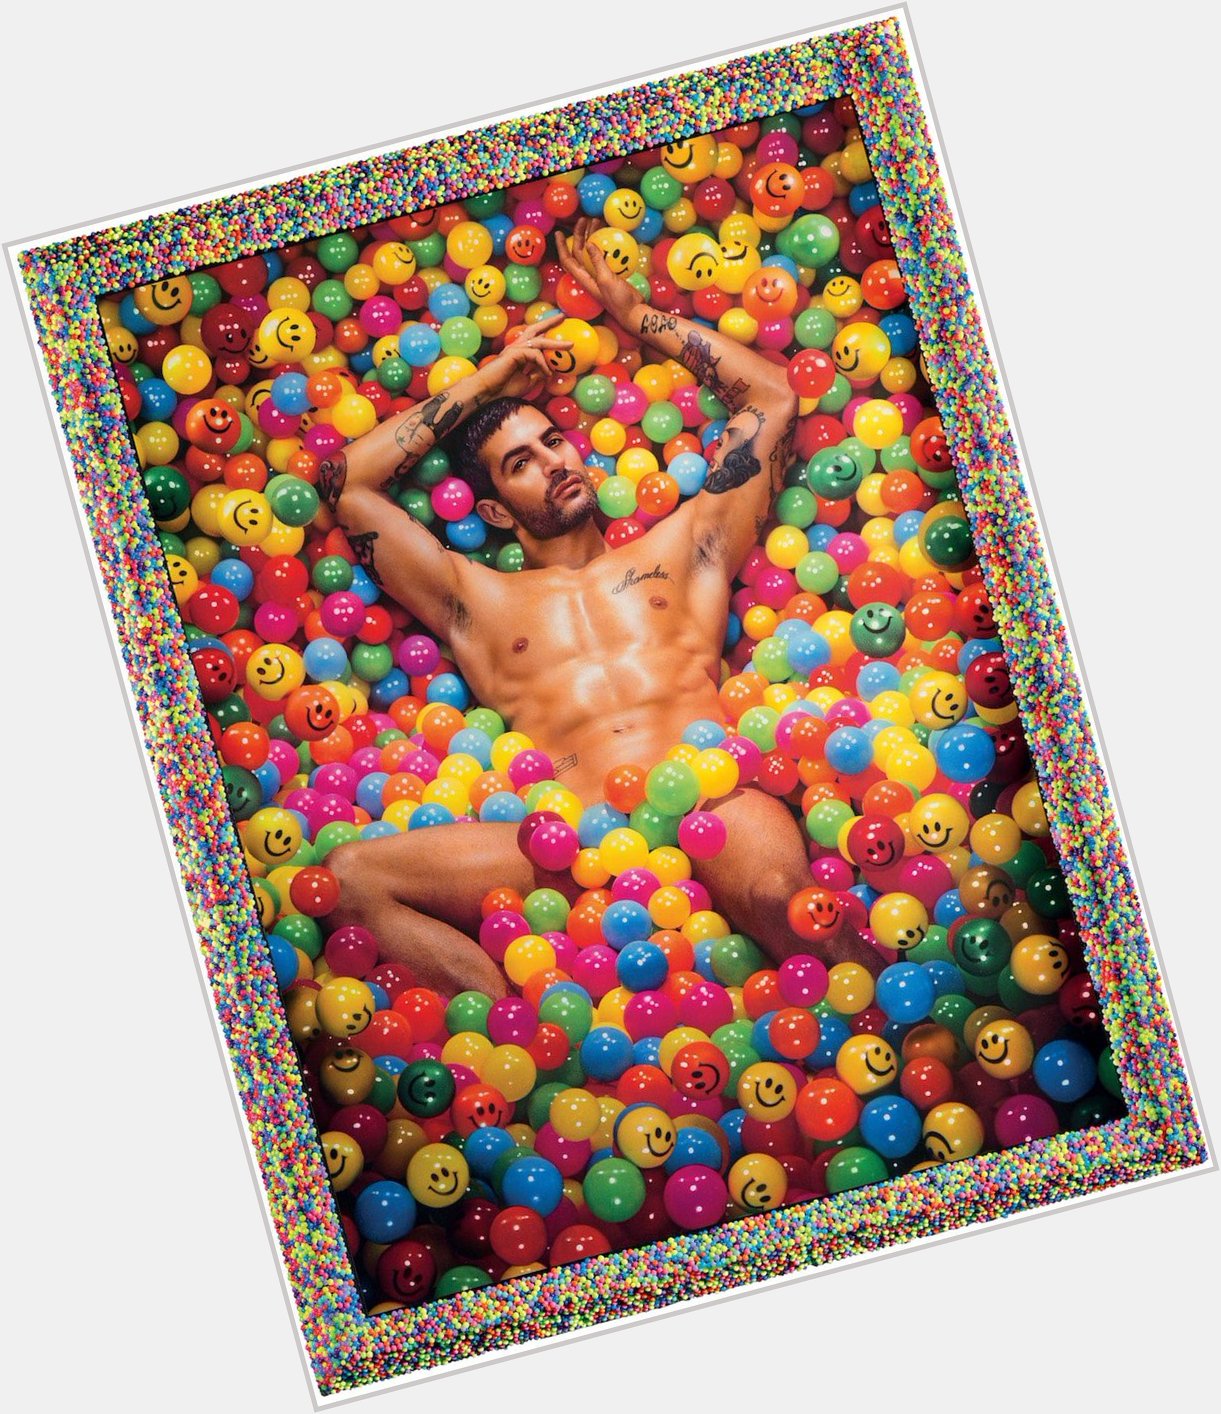 Happy birthday Marc Jacobs! Marc Jacobs by Pierre et Gilles (2012) 